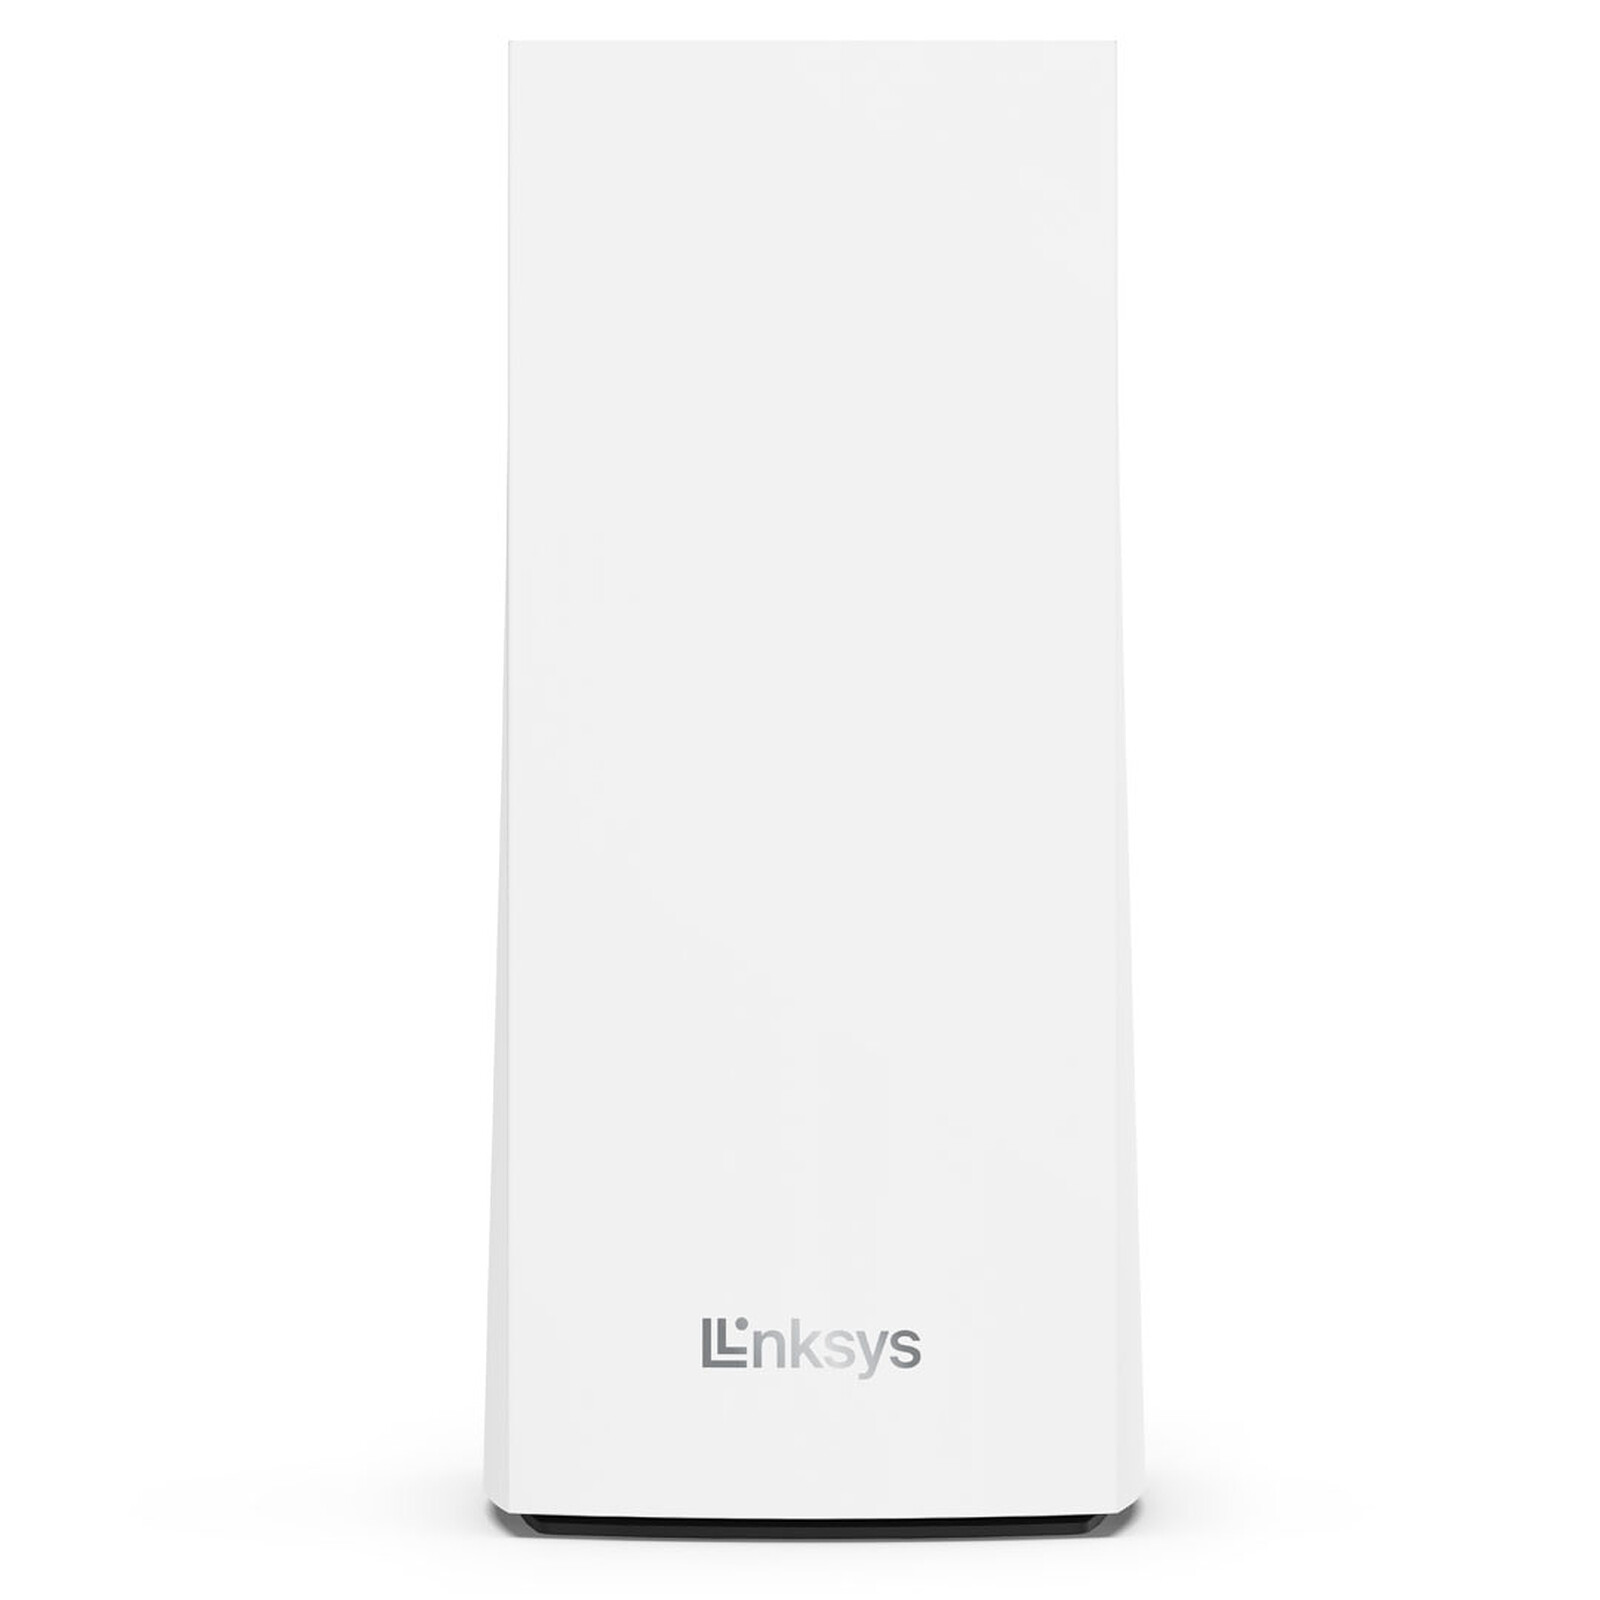 quiet scar Embed Linksys Velop MX4200 - Modem & router - LDLC 3-year warranty